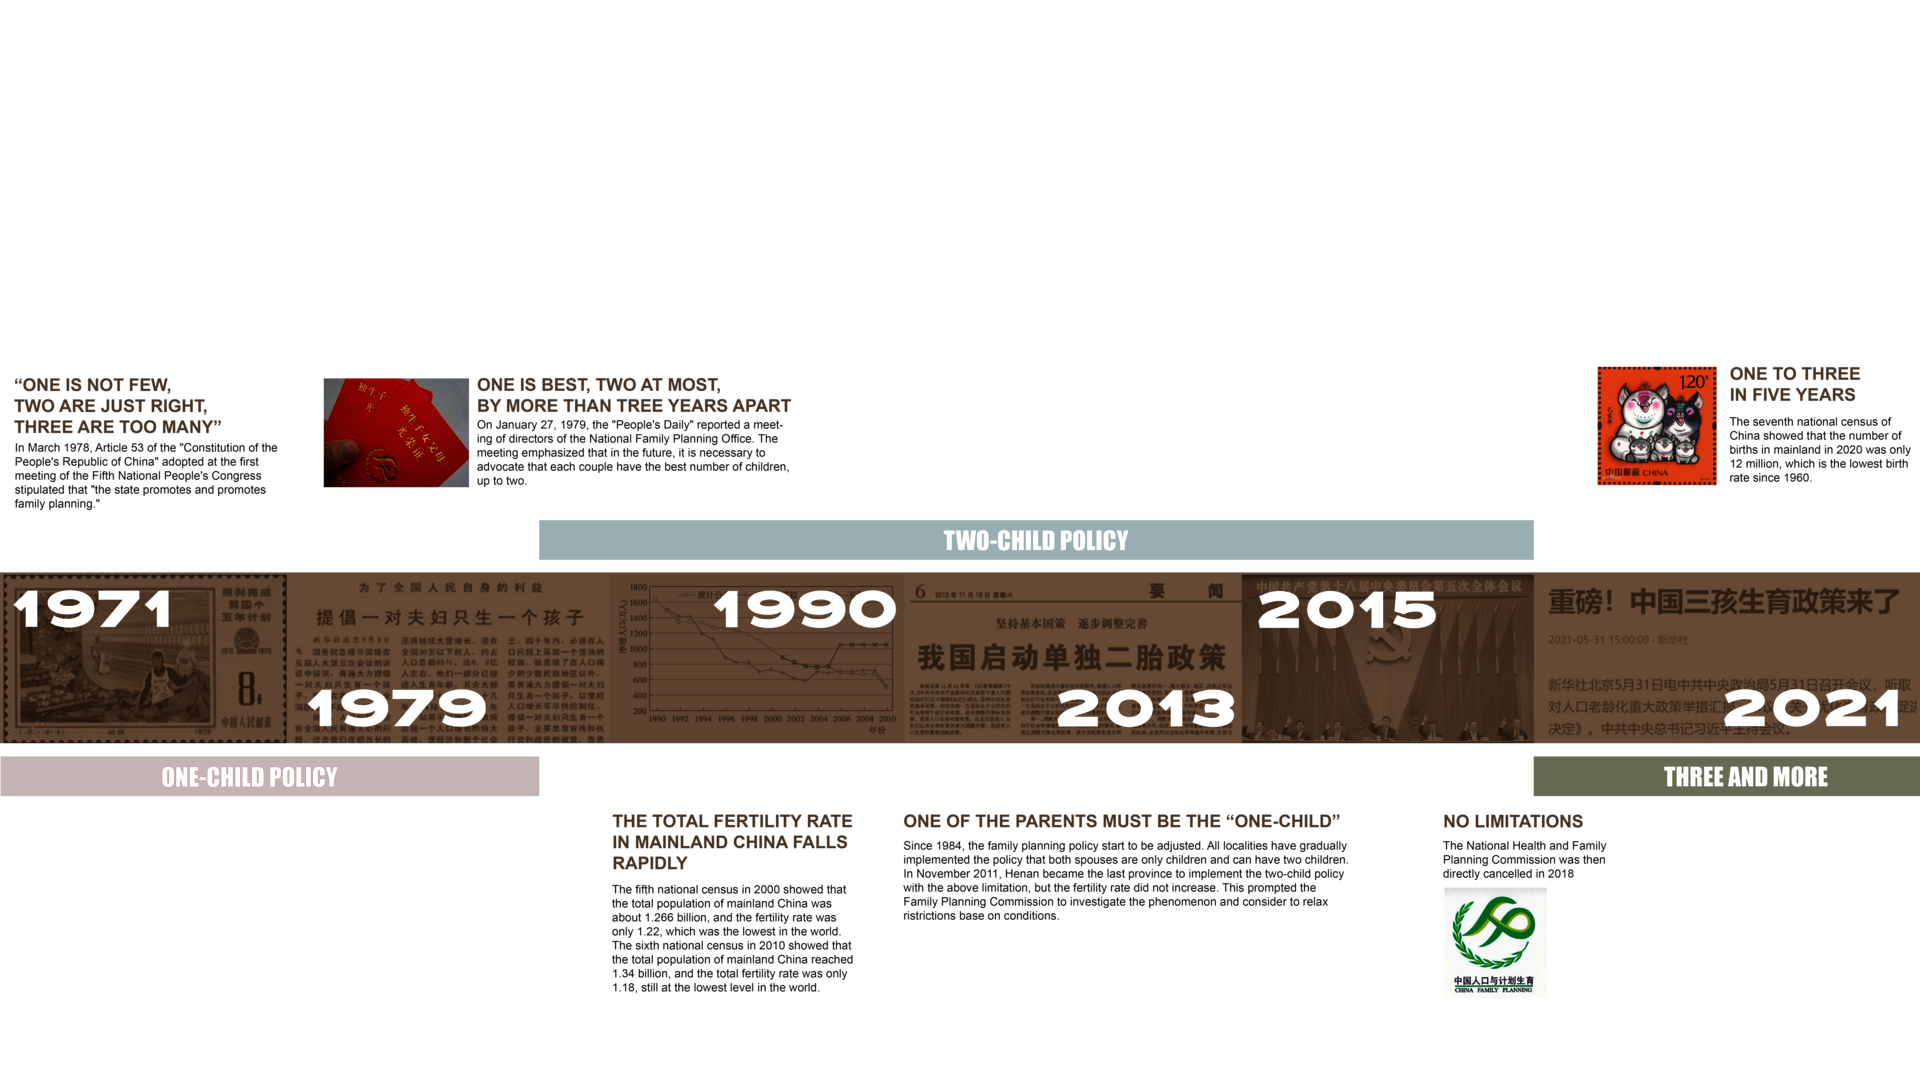 This timeline different phase of family planning policy in China, it's composed of text and image collage